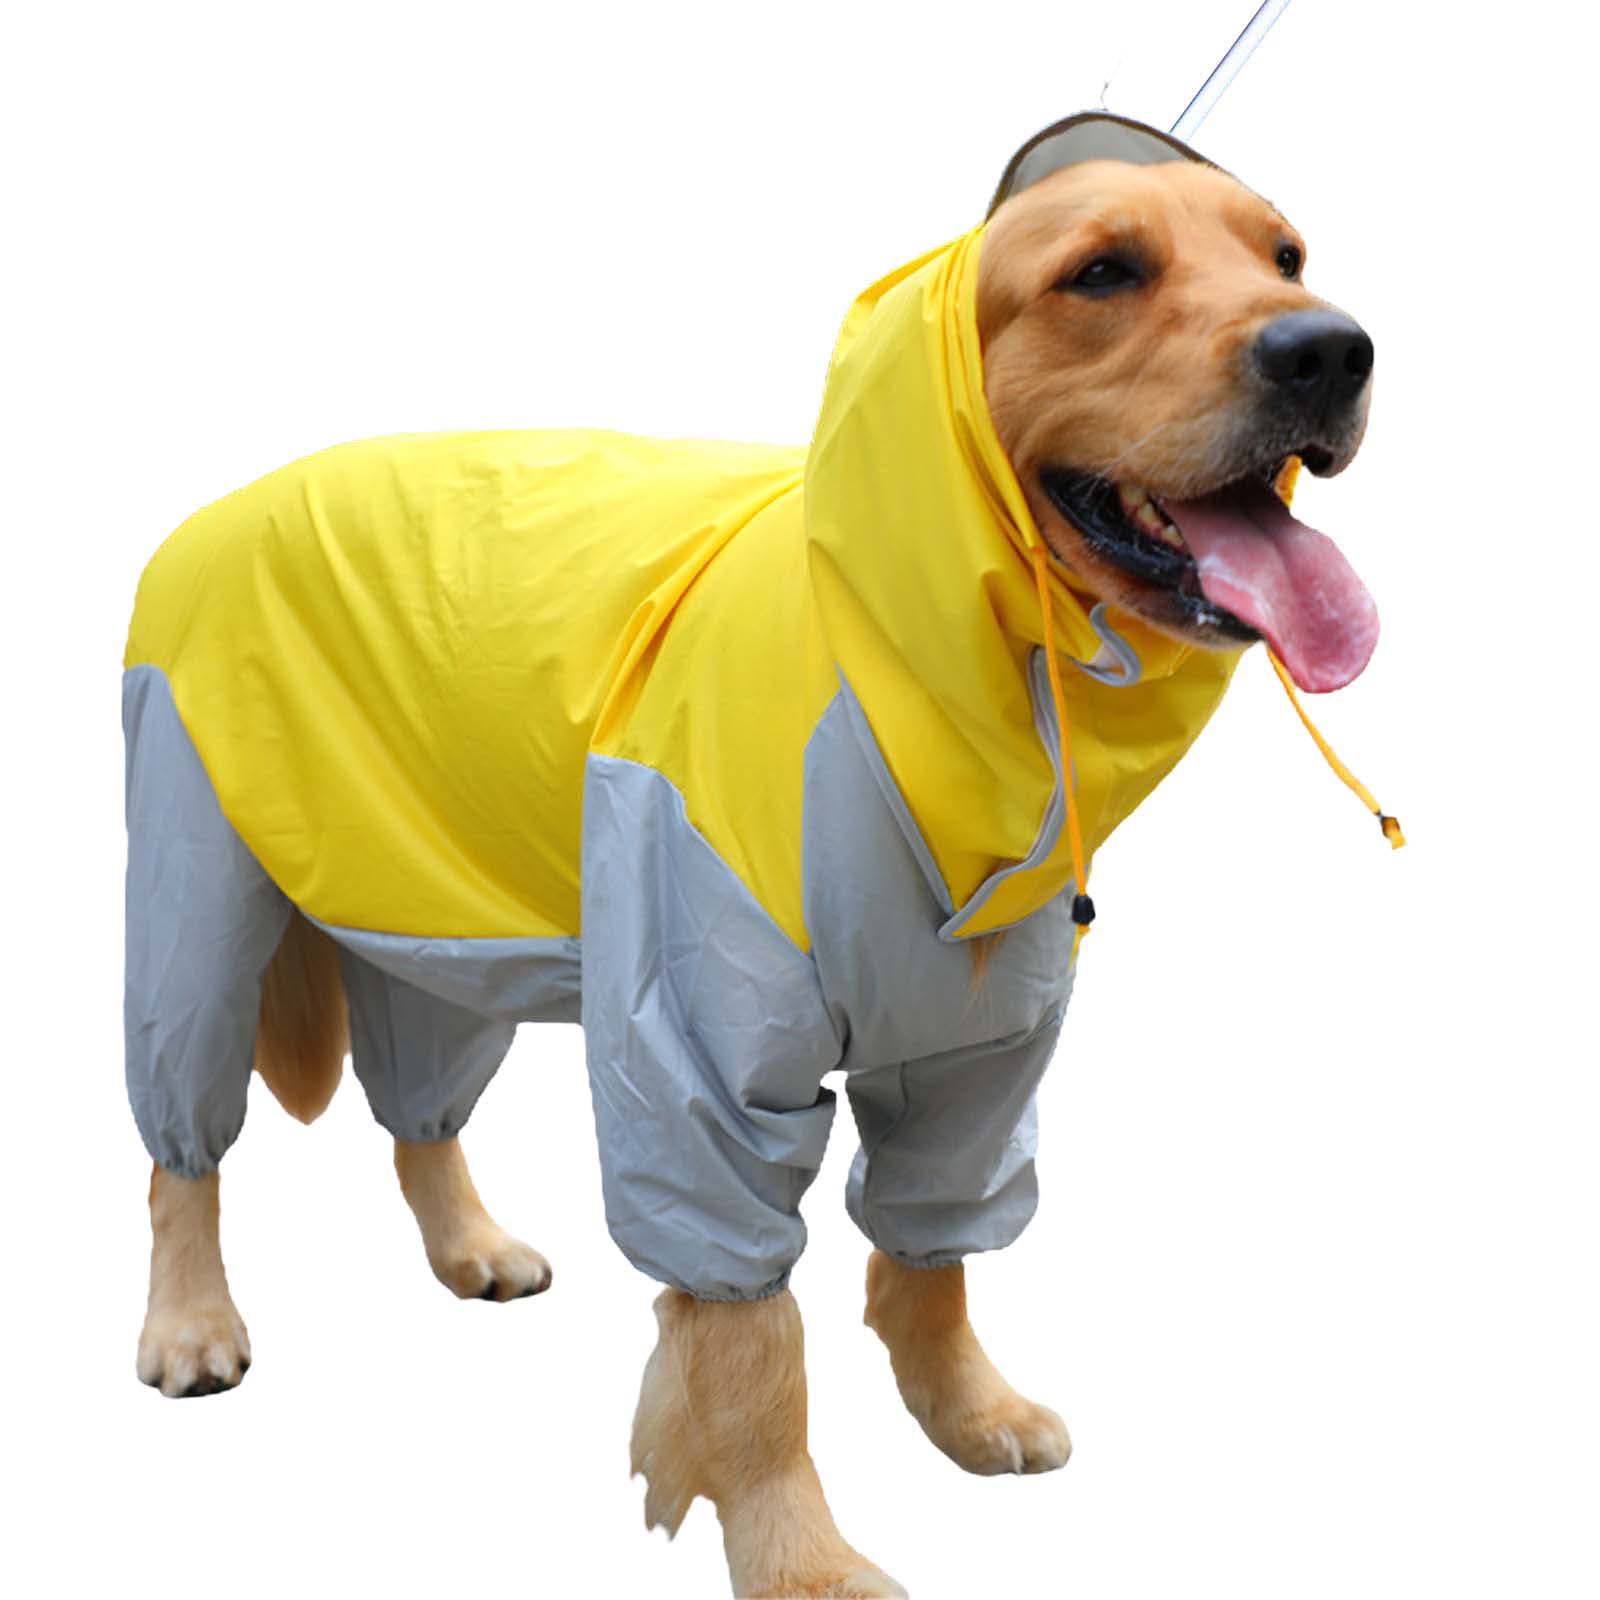 rain snow jacket Yellow Dog raincoat zipper in back waterproof jumpsuit with collar hole and reflective trim Xsmall